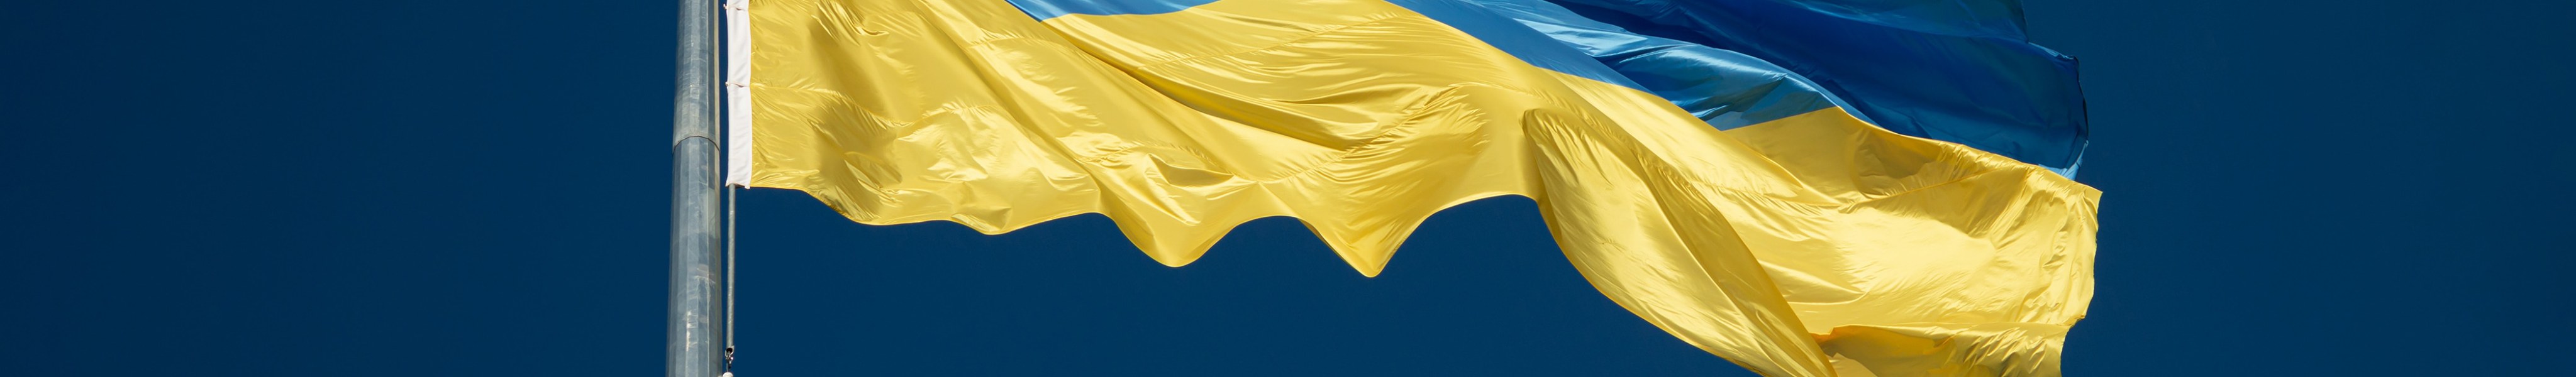 The flag of Ukraine flowing in a breeze on a clear blue sky.